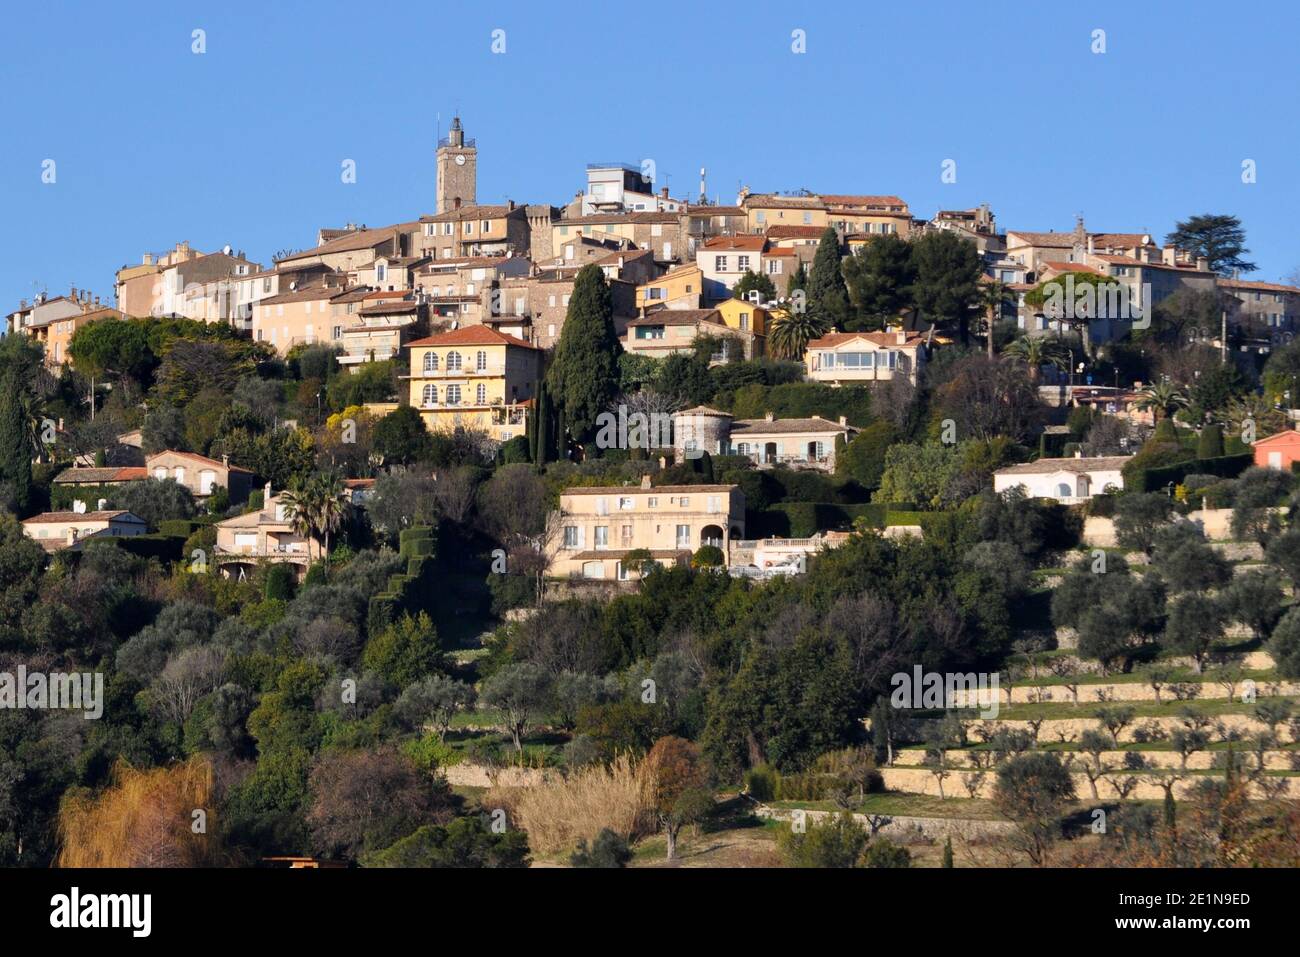 France, french riviera, Mougins, this n beautiful medieval village stands between pines and olive trees, Pablo Picasso live there 15 years. Stock Photo